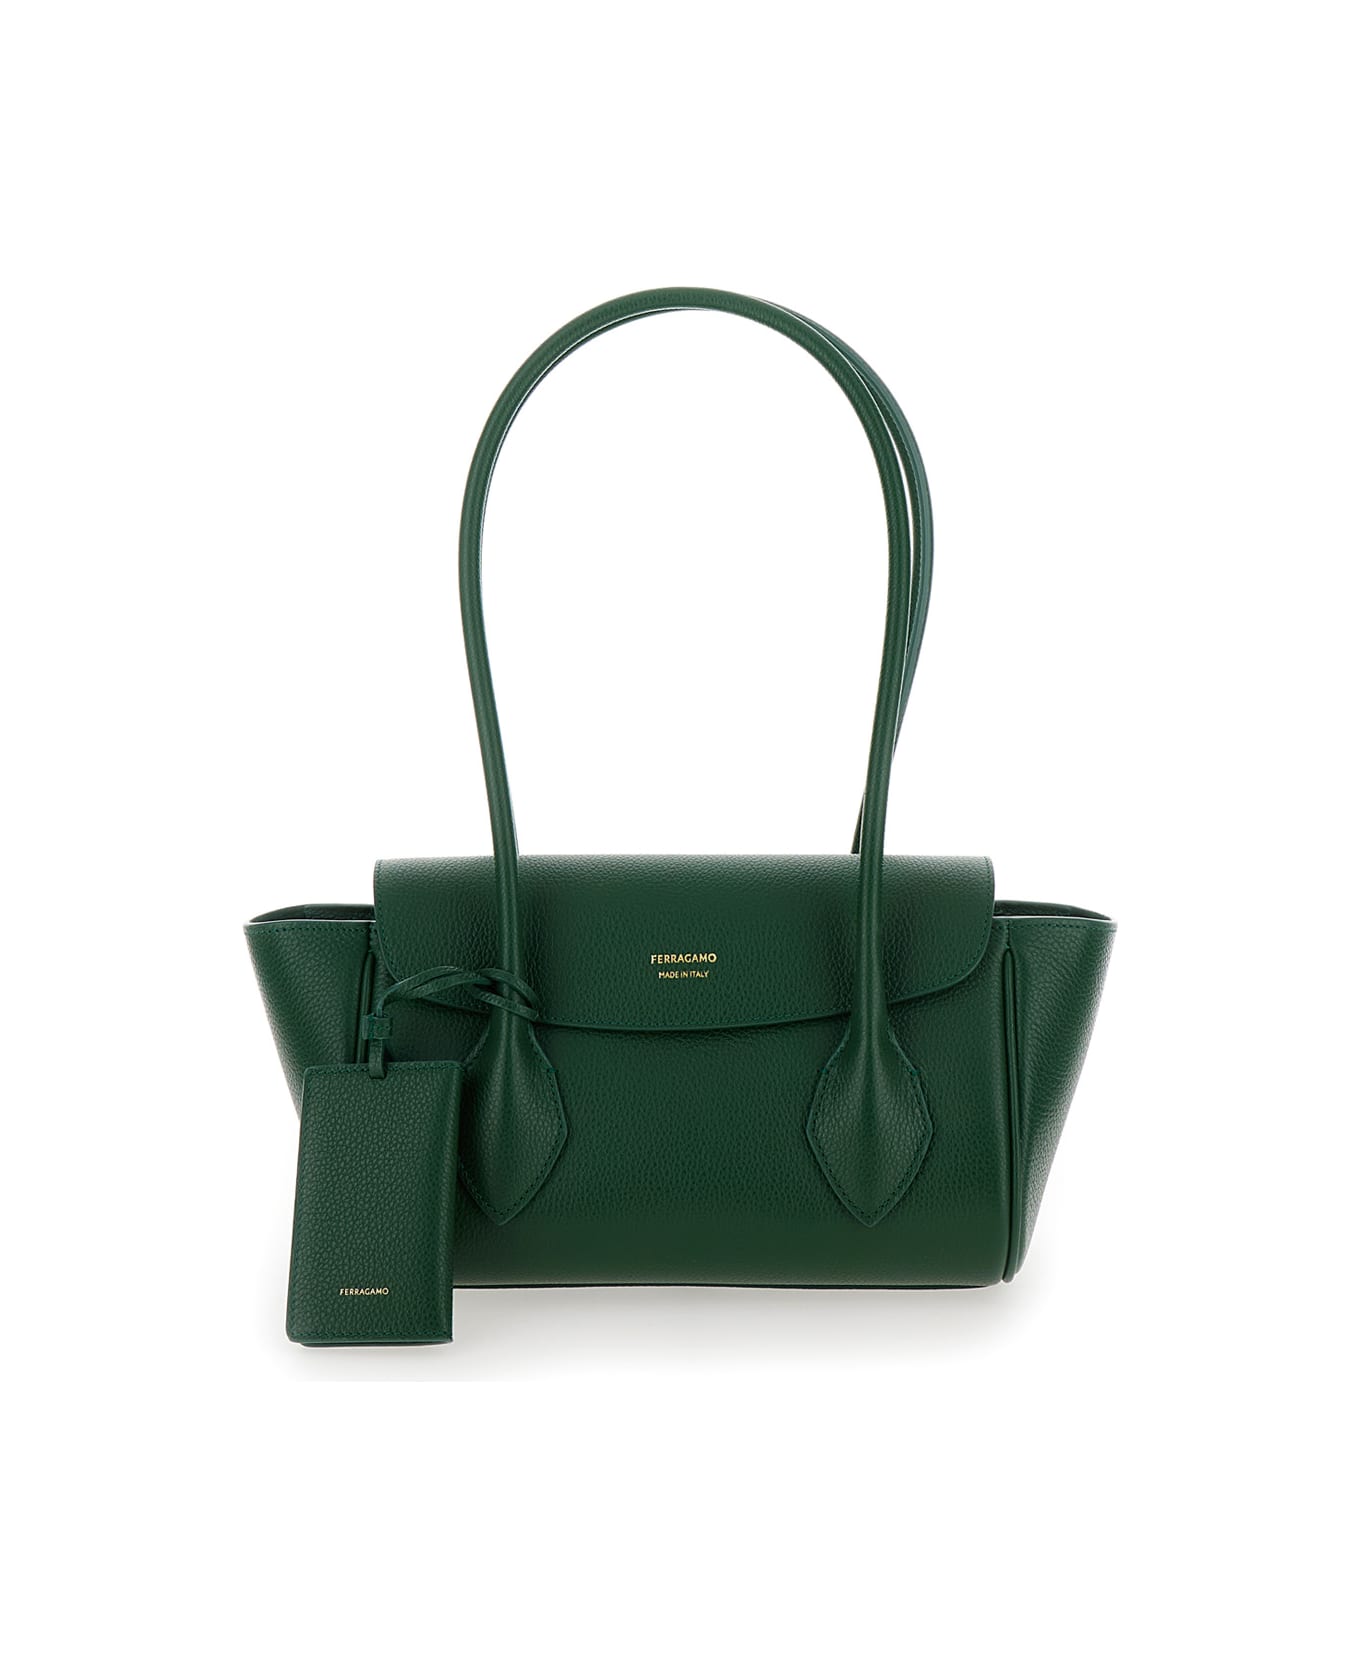 Ferragamo 'east-west S' Green Handbag With Logo Detail In Hammered Leather Woman - Green トートバッグ